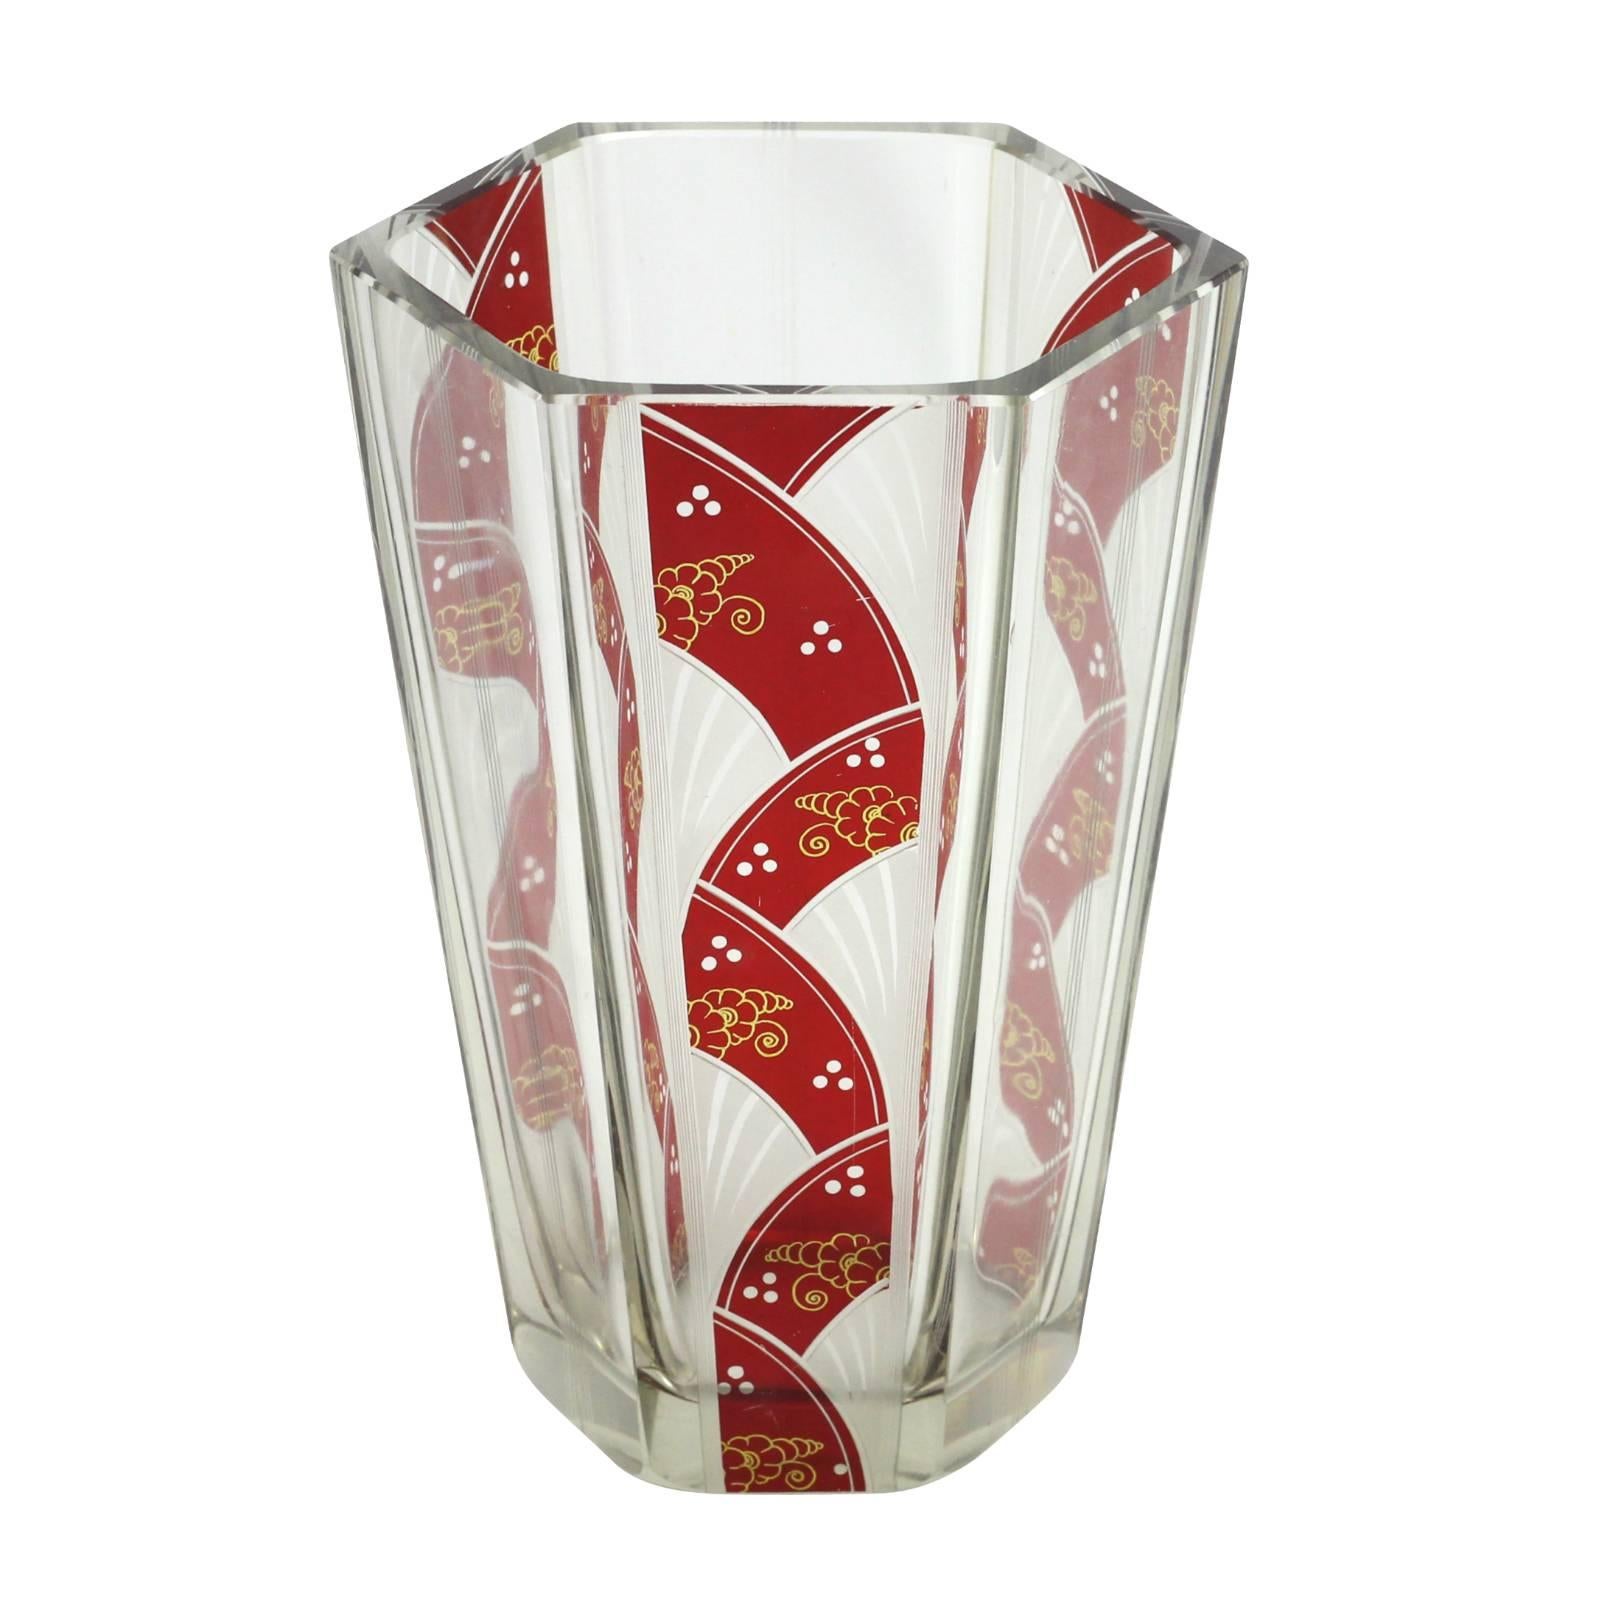 Early 20th Century Karl Palda Hexagonal Art Deco Enameled Bohemian Glass Vase In Excellent Condition For Sale In Brisbane, Queensland